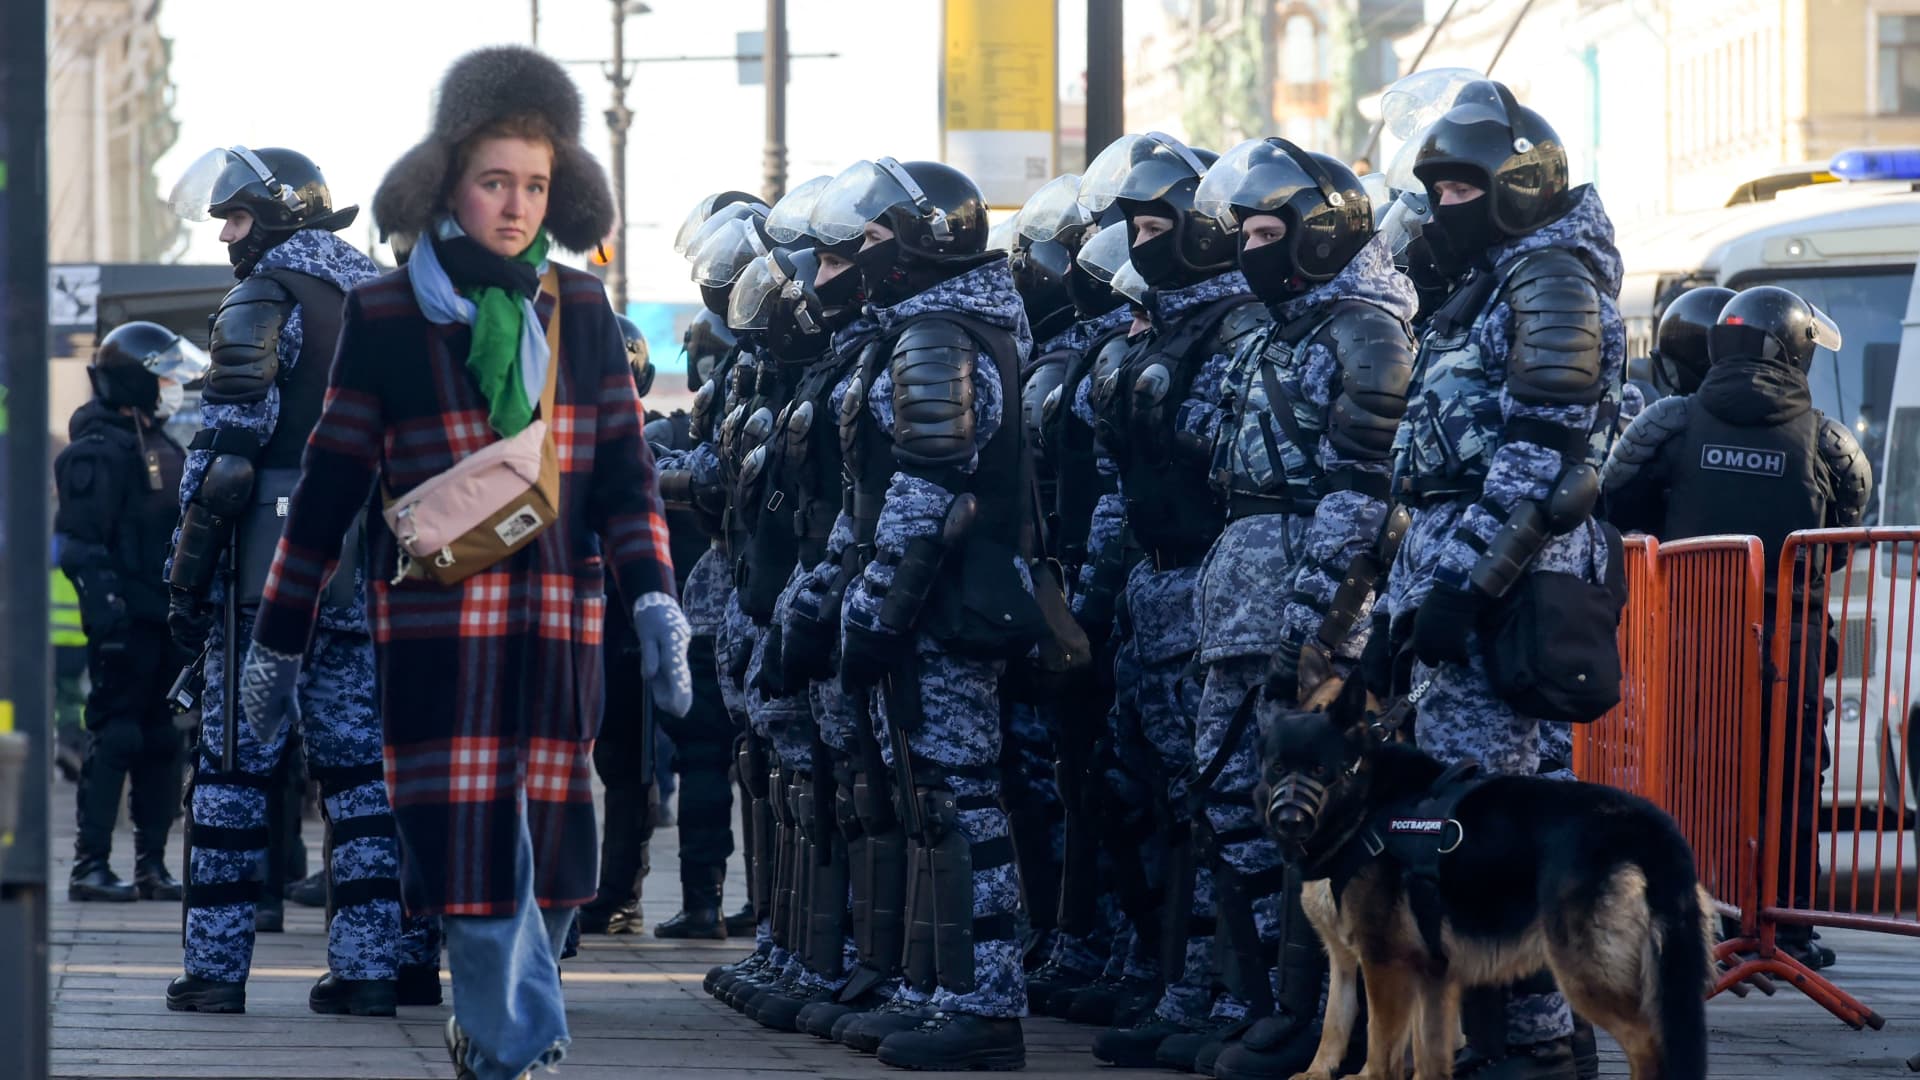 Riot police officers are seen deployed in the streets during a protest against Russian military action in Ukraine, in central Saint Petersburg on March 13, 2022.